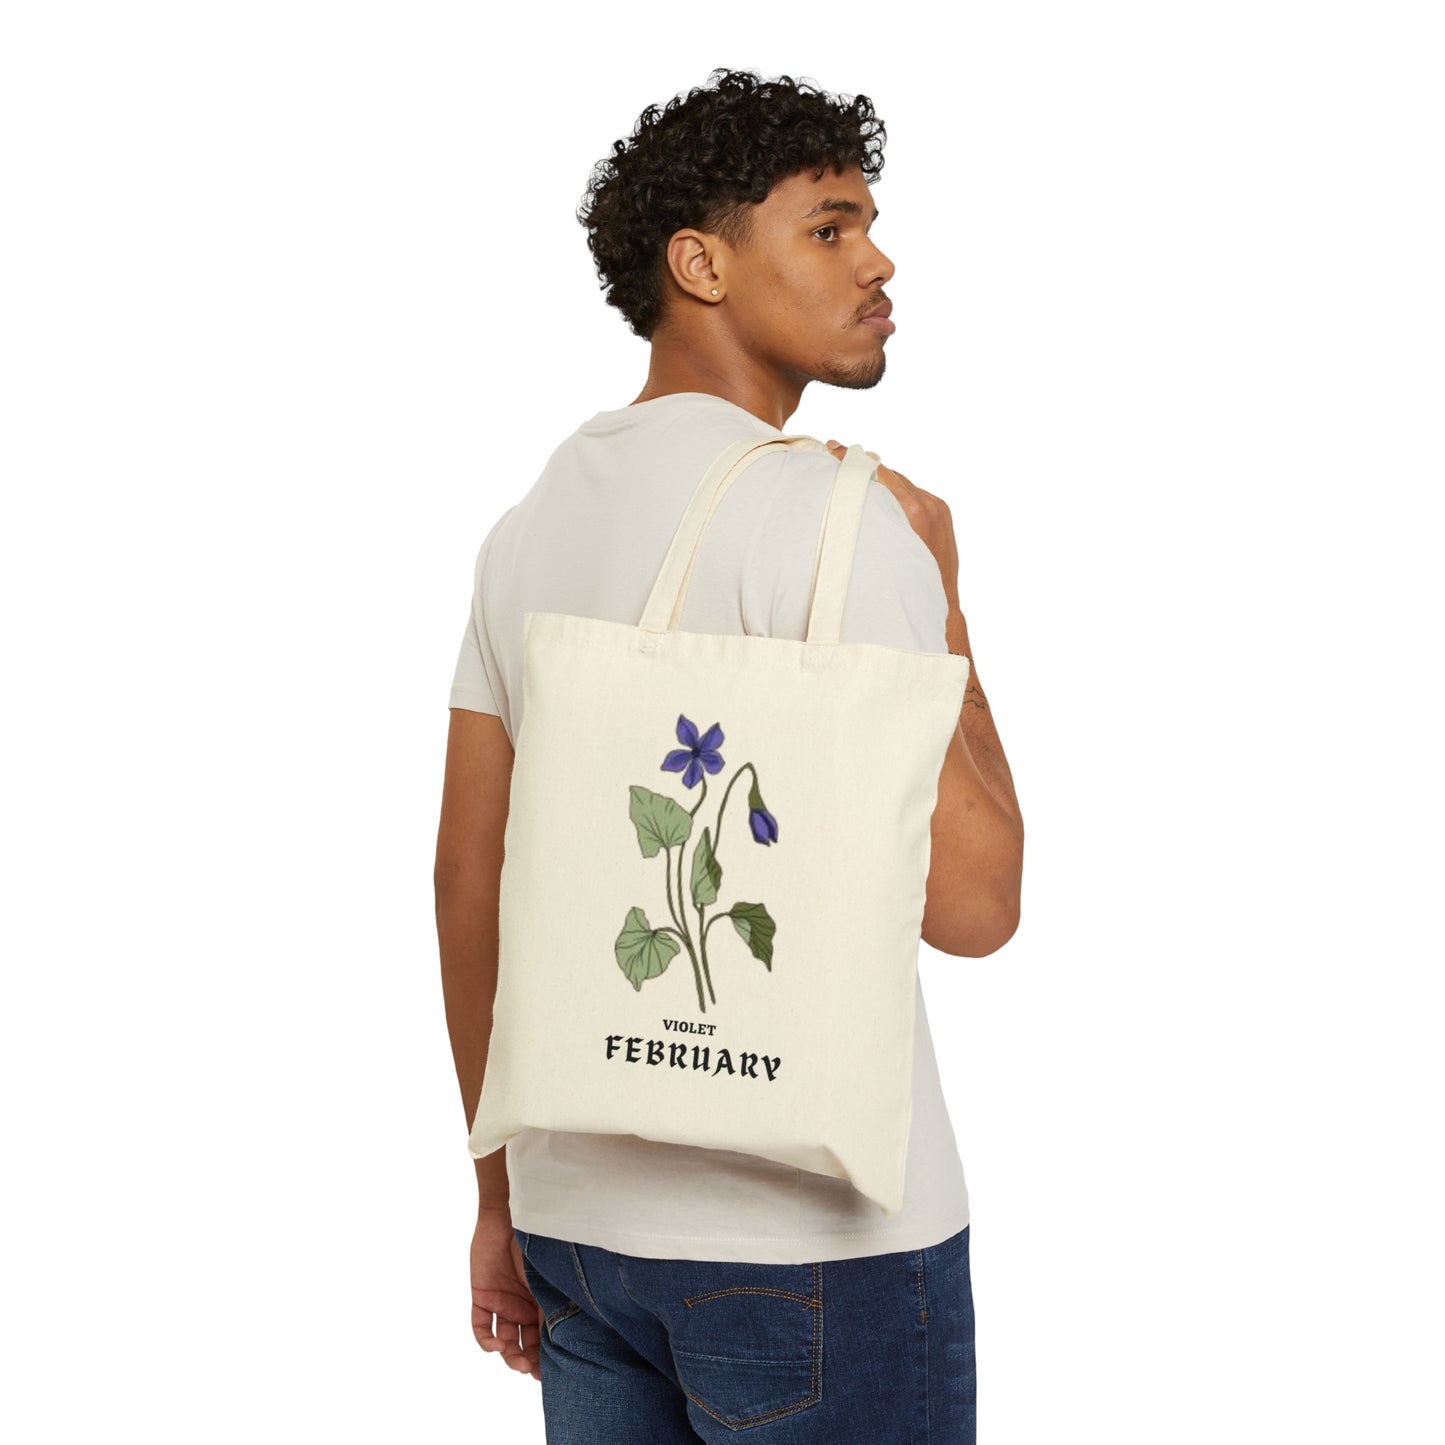 FEBRUARY BIRTH MONTH FLOWER TOTE (VIOLET)